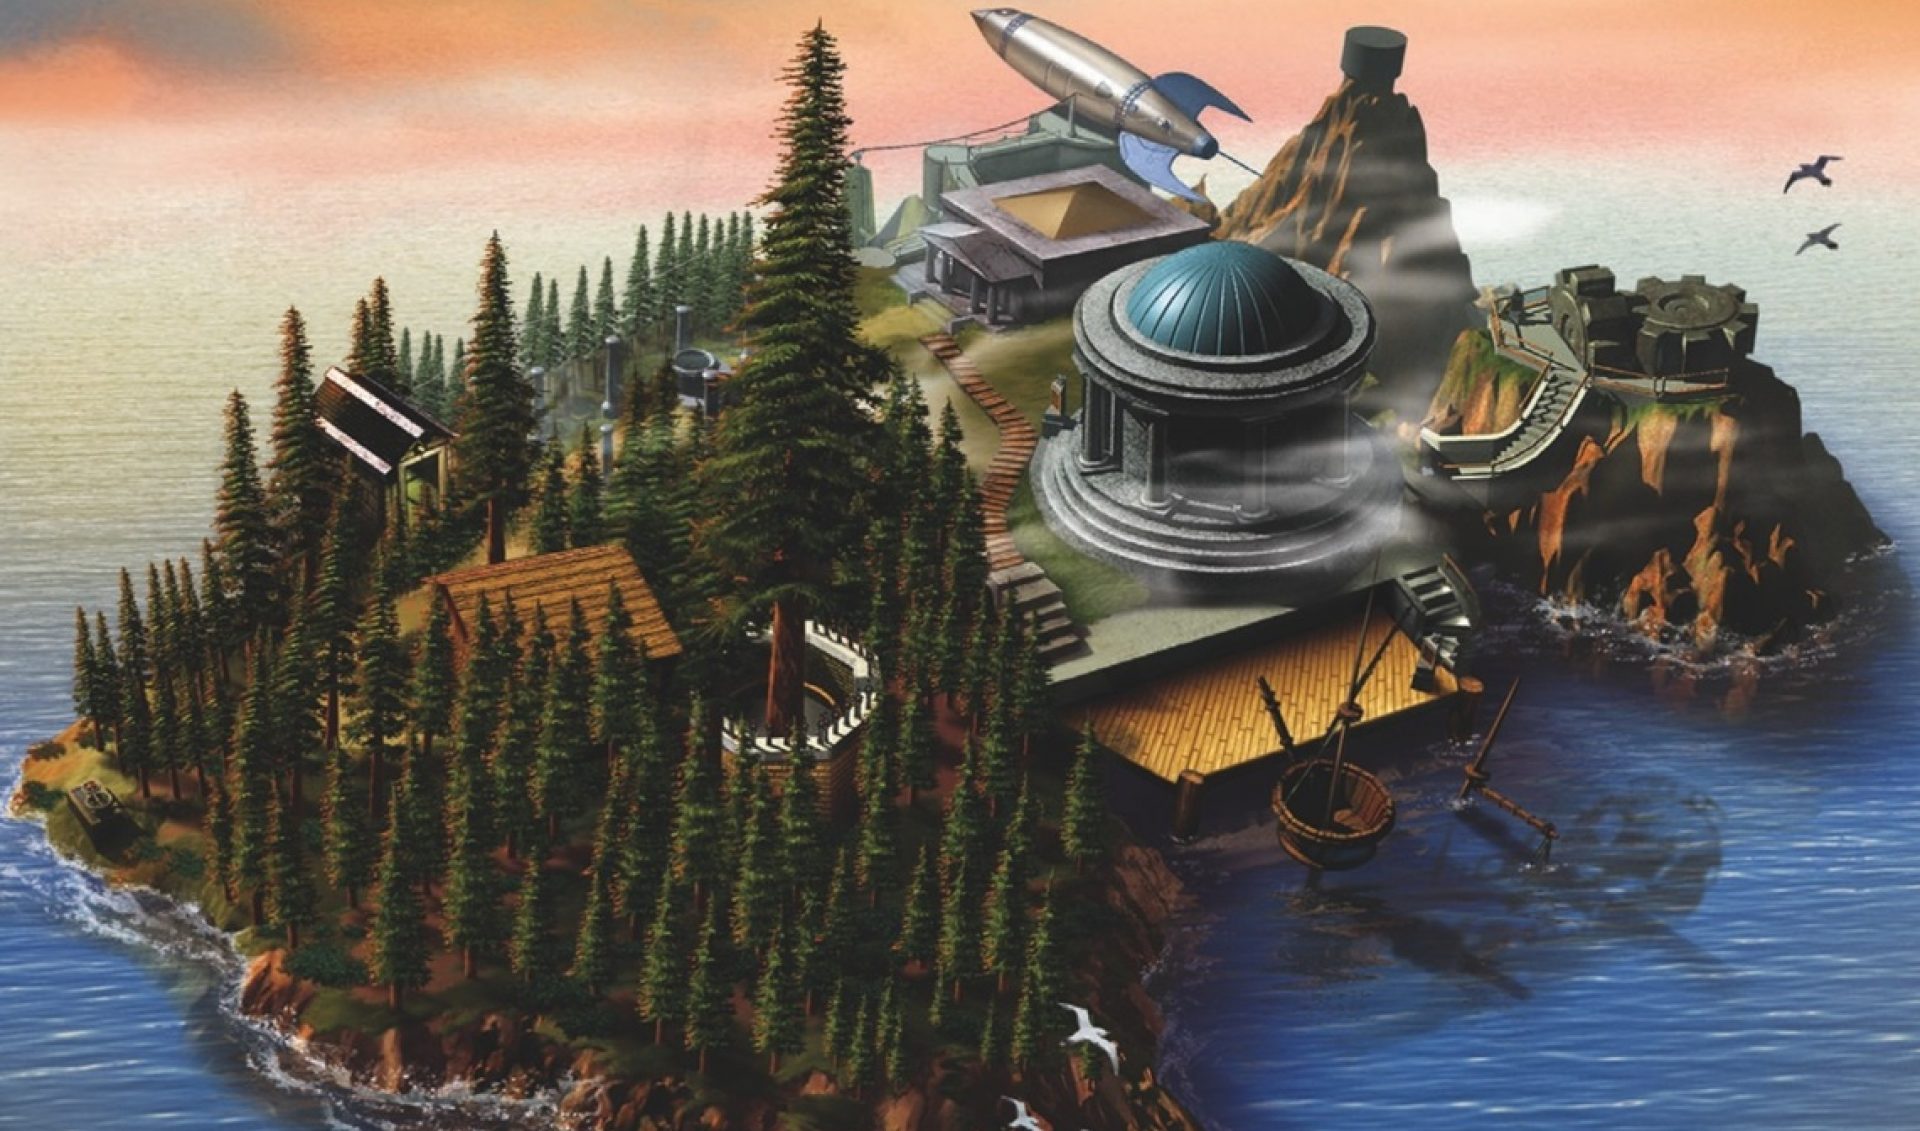 Series Based Off The Video Game ‘Myst’ Coming To Hulu